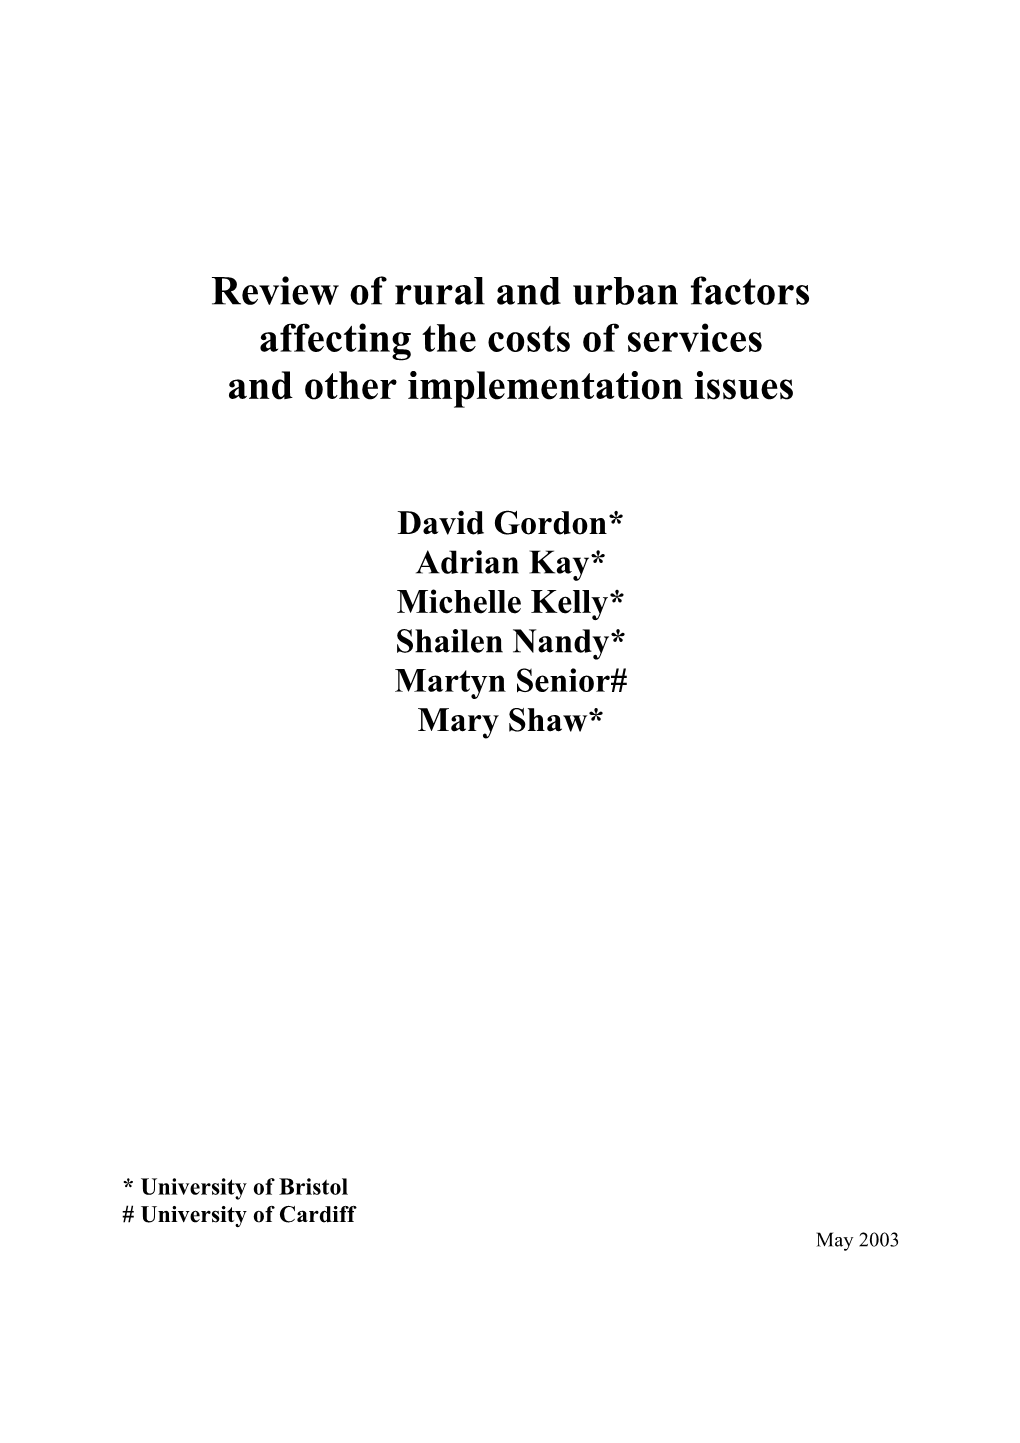 Review of Rural and Urban Factors Affecting the Costs of Services and Other Implementation